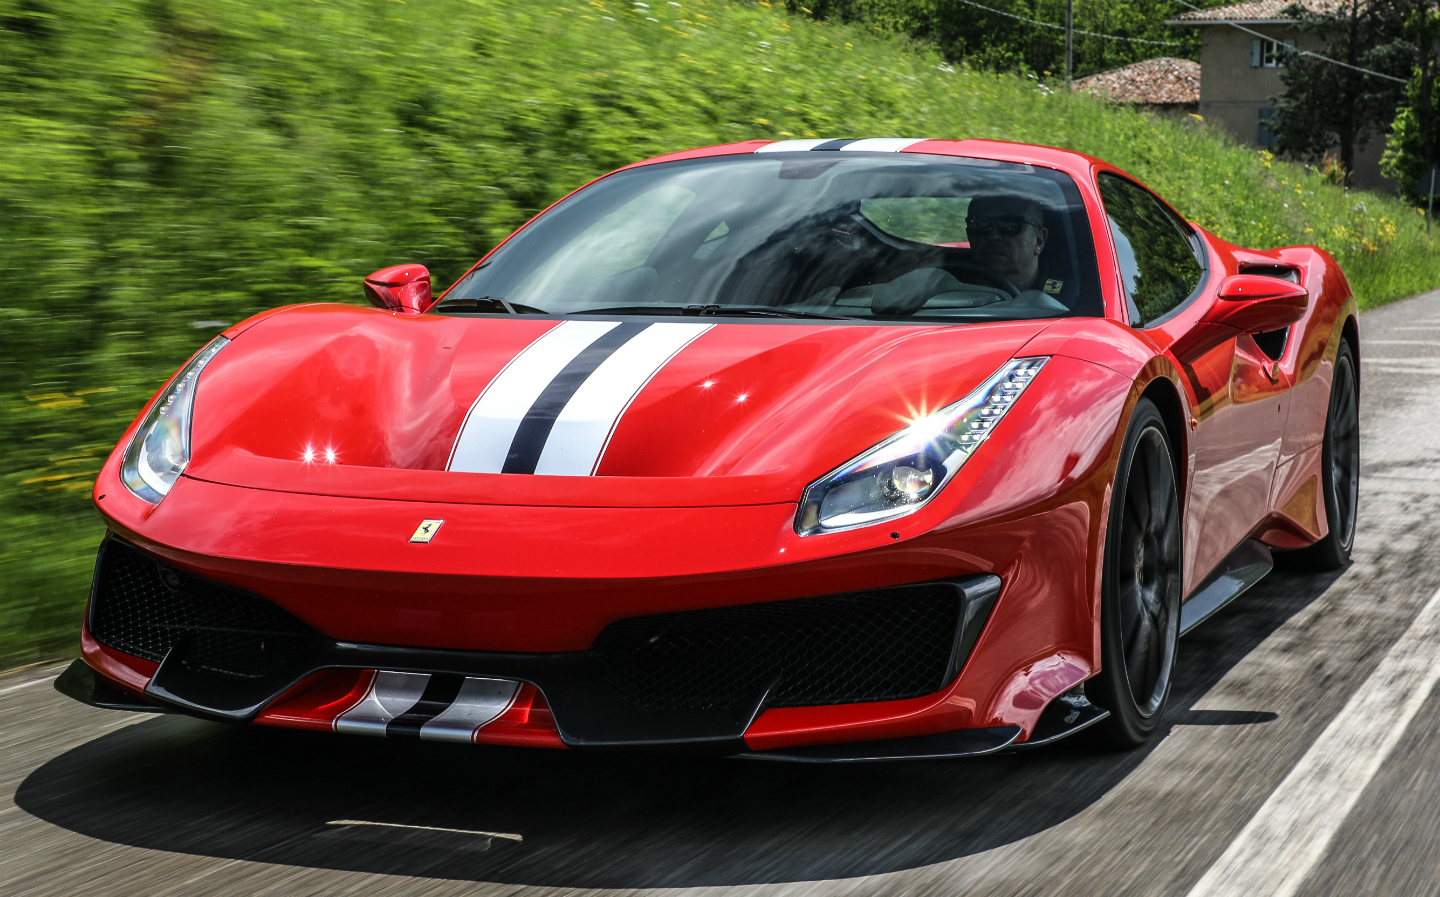 Jeremy Clarkson: The Ferrari 488 Pista is so good I might actually buy one